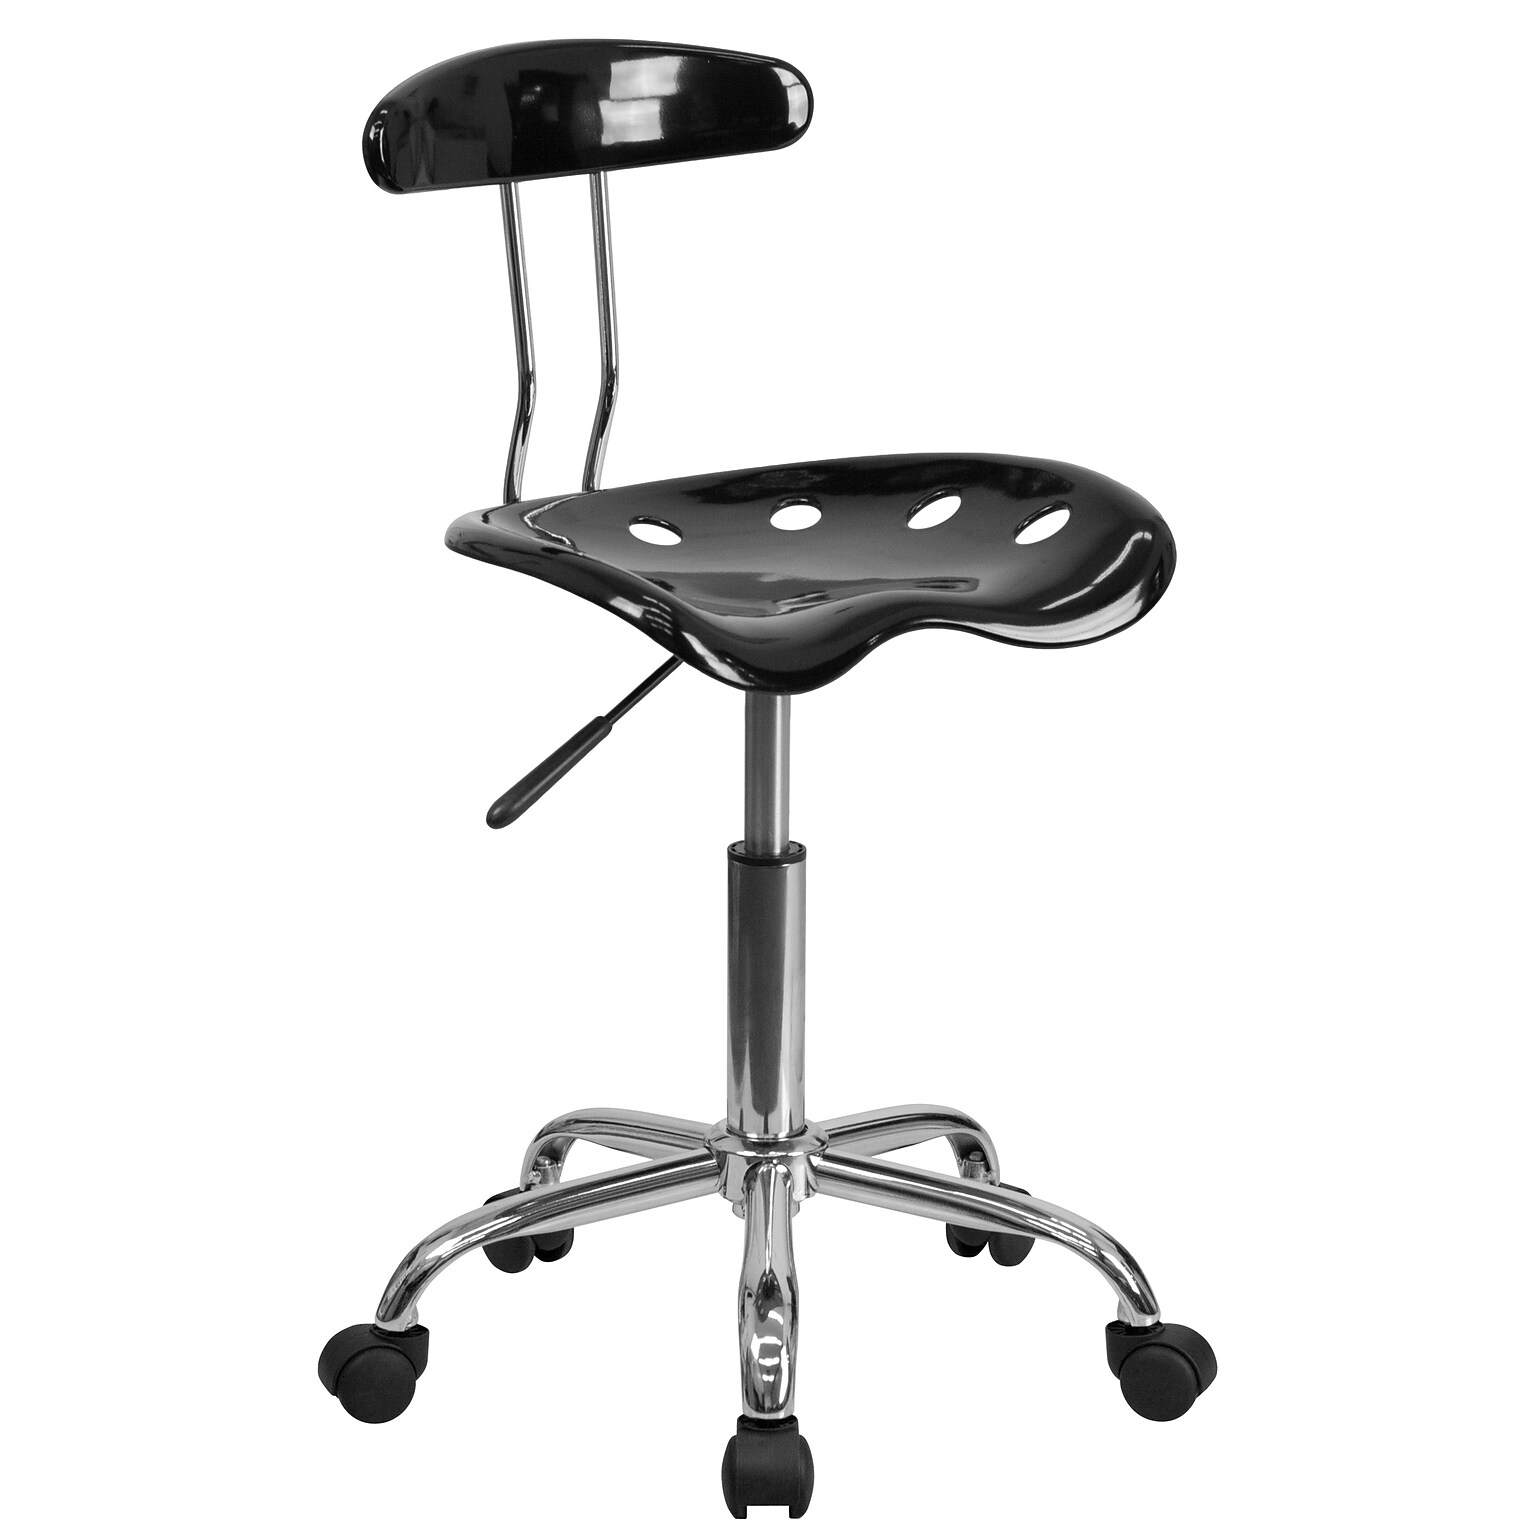 Flash Furniture Elliott Armless Plastic and Chrome Task Office Chair with Tractor Seat, Black and Chrome (LF214BLACK)